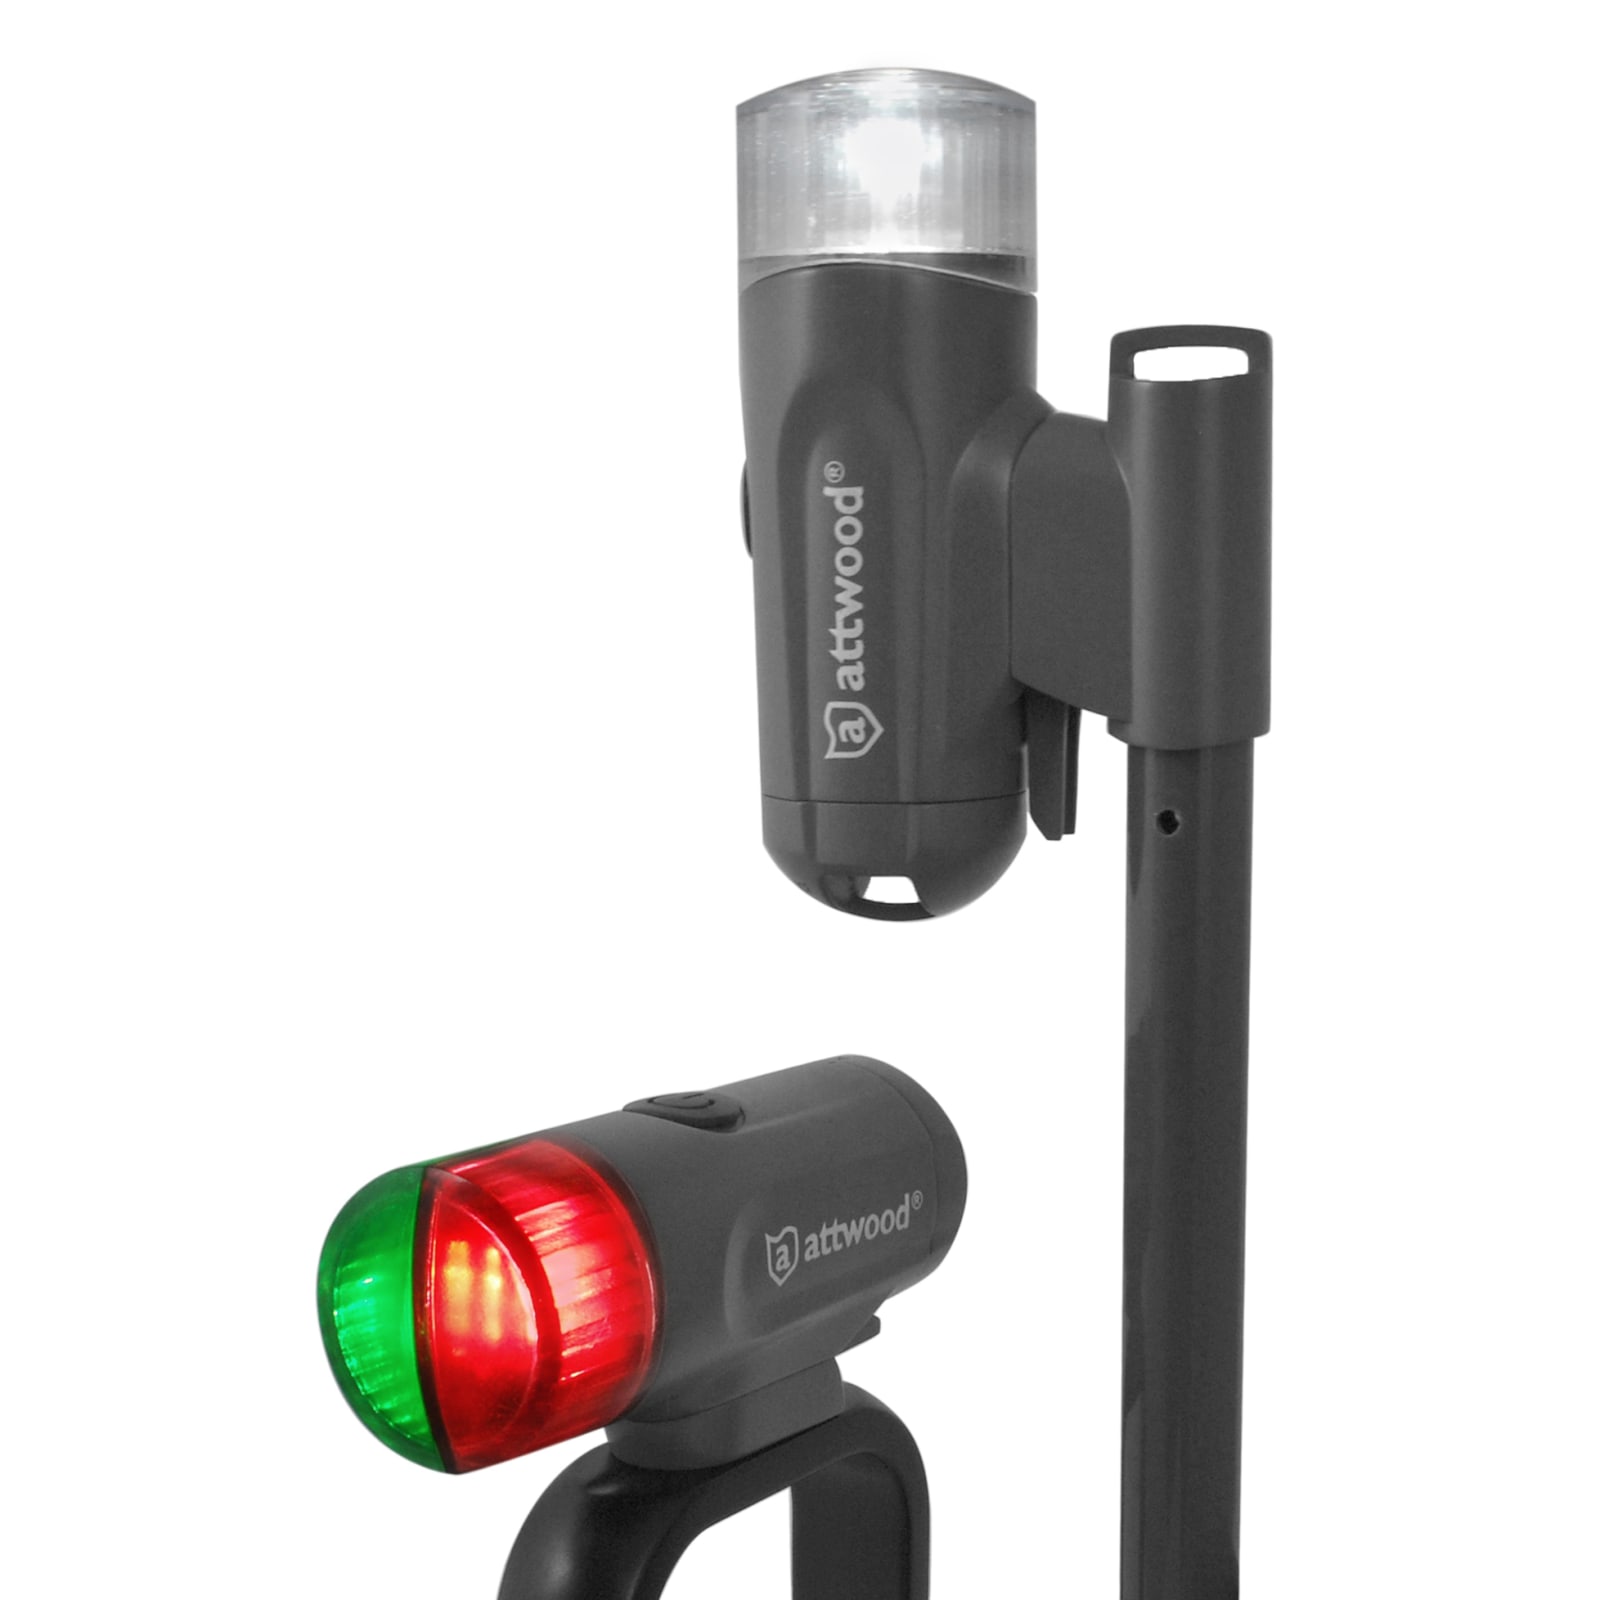 Attwood Portable LED Bow & Stern Light Combos